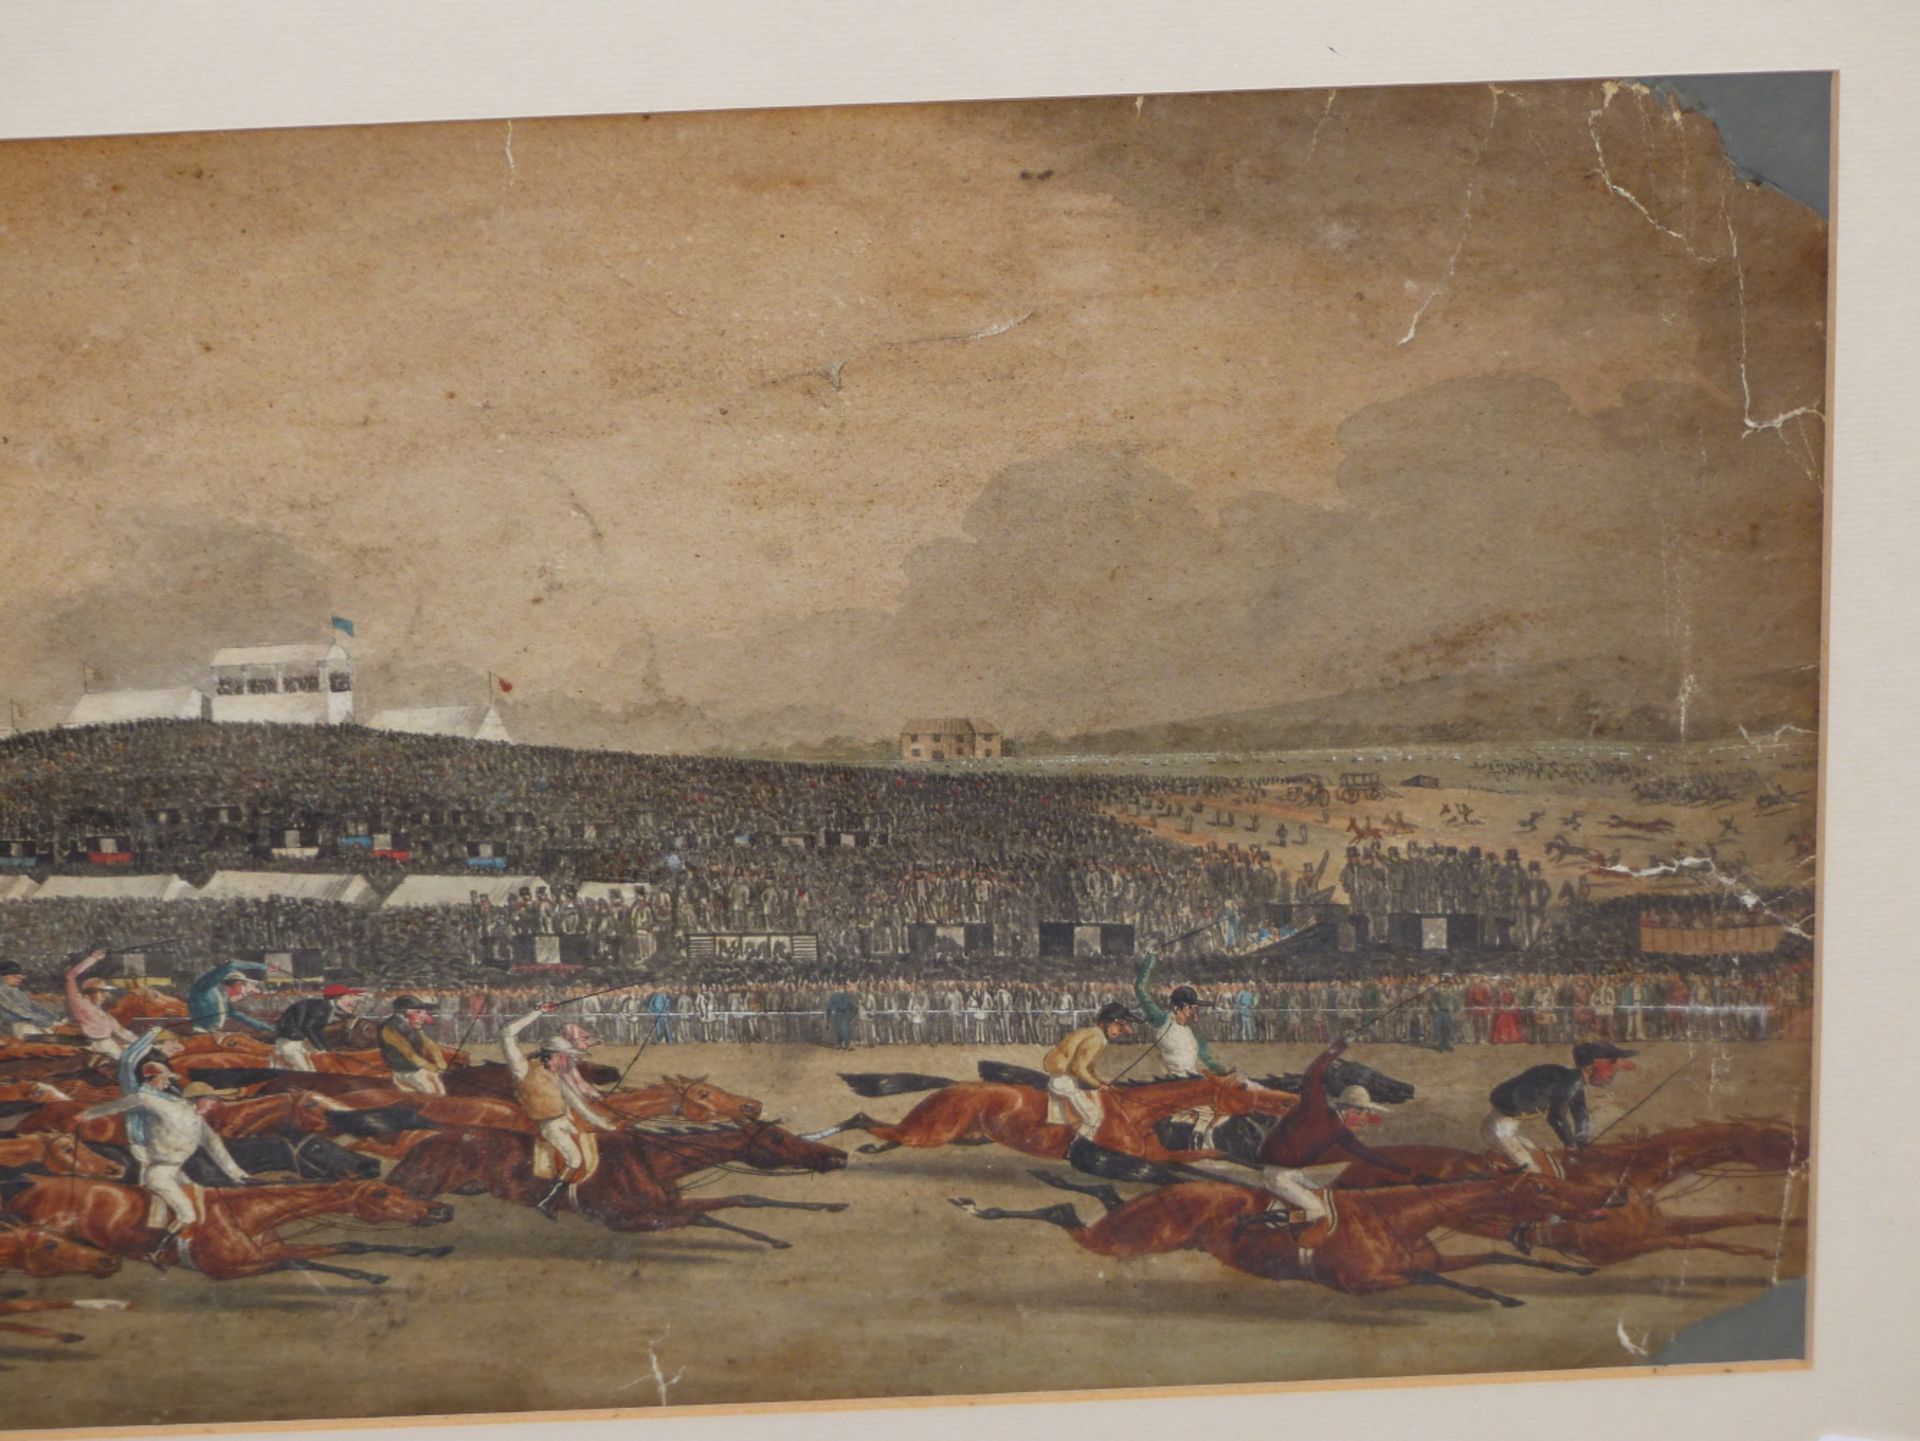 19th C. ENGLISH SCHOOL DANIEL O'ROUKE WINNING HE DERBY 1852, REPUTEDLY BY JAMES G. NOBLE, - Image 2 of 26